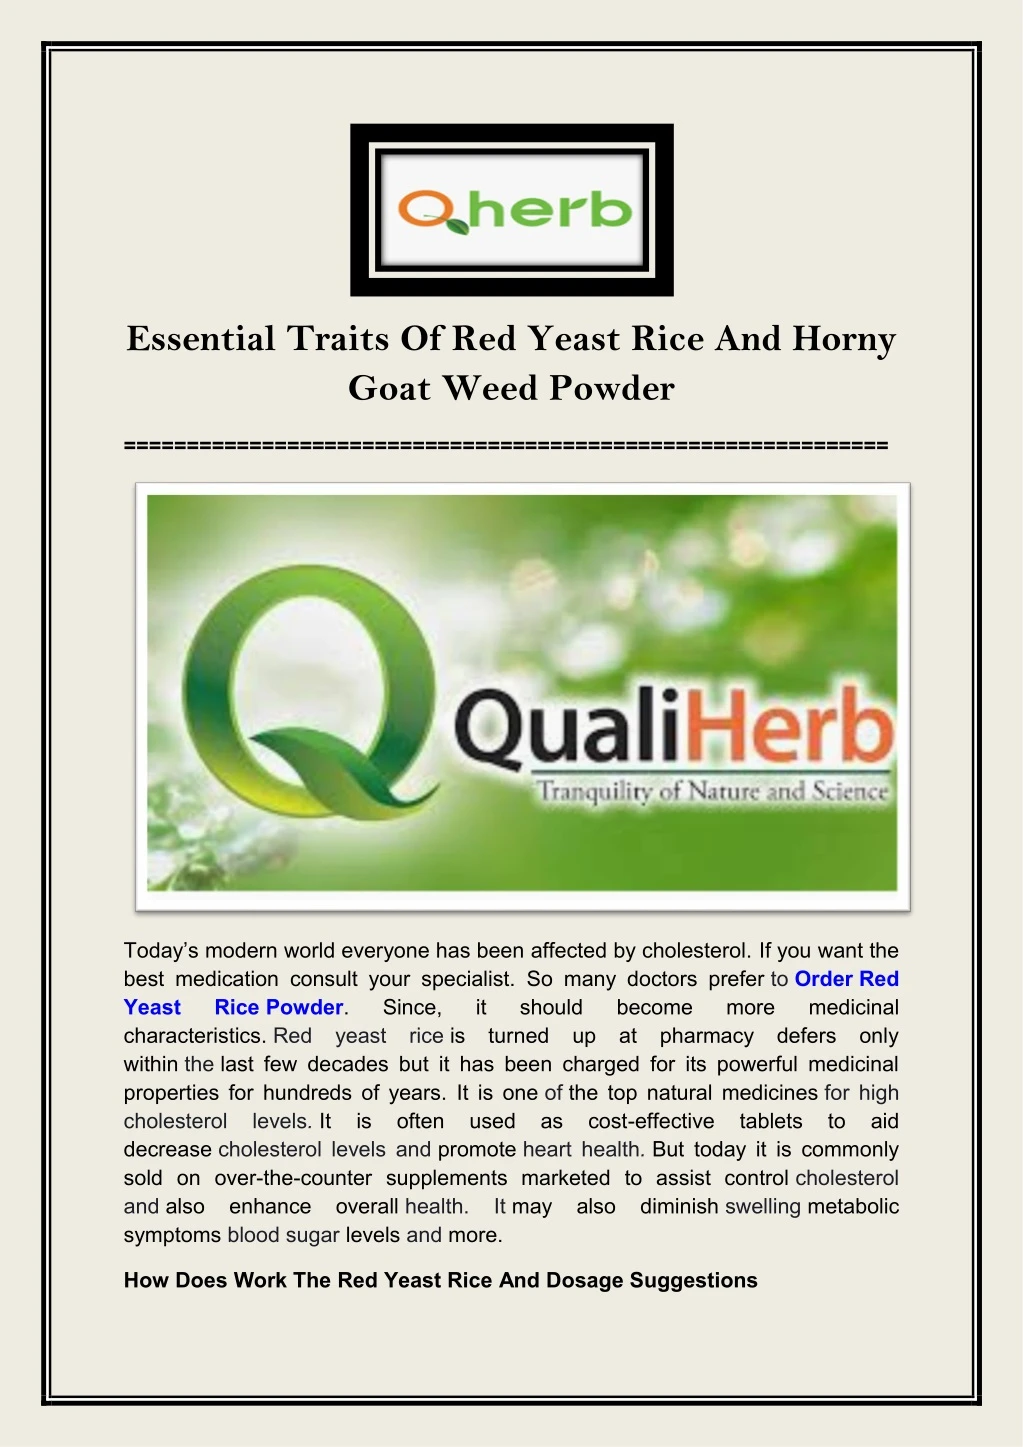 essential traits of red yeast rice and horny goat